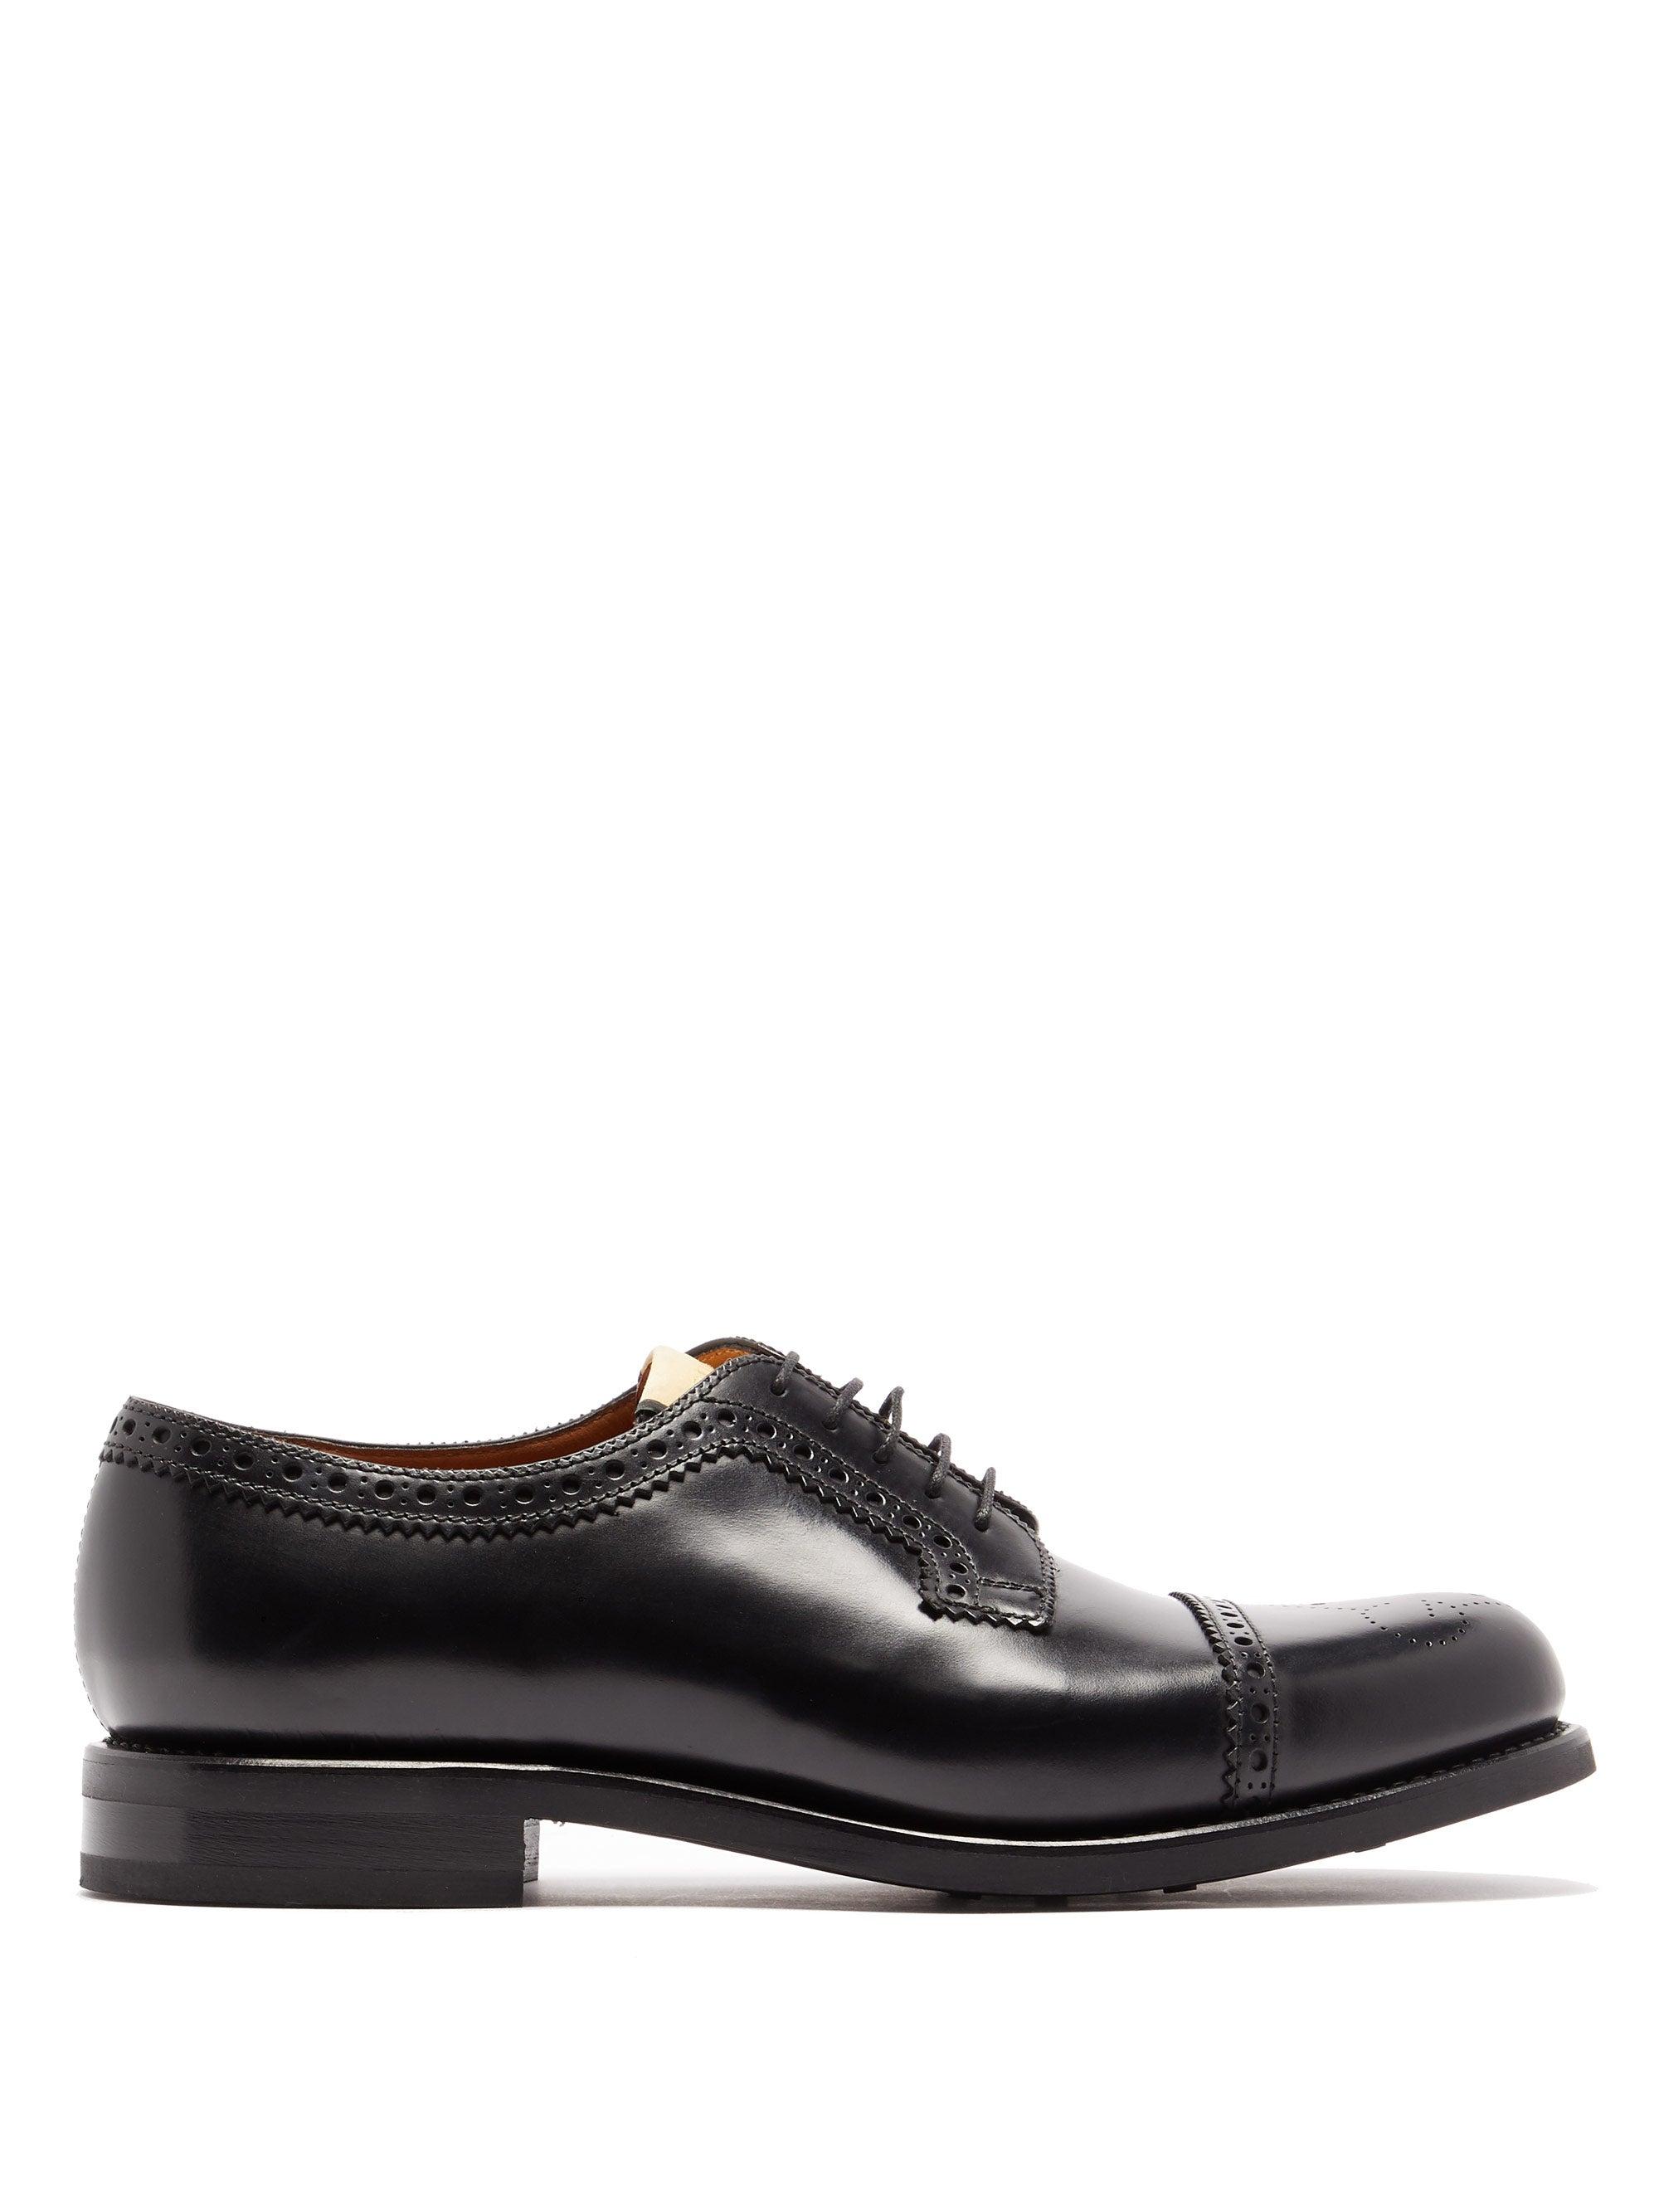 Gucci Darko Leather Derby Shoes in Black for Men - Lyst